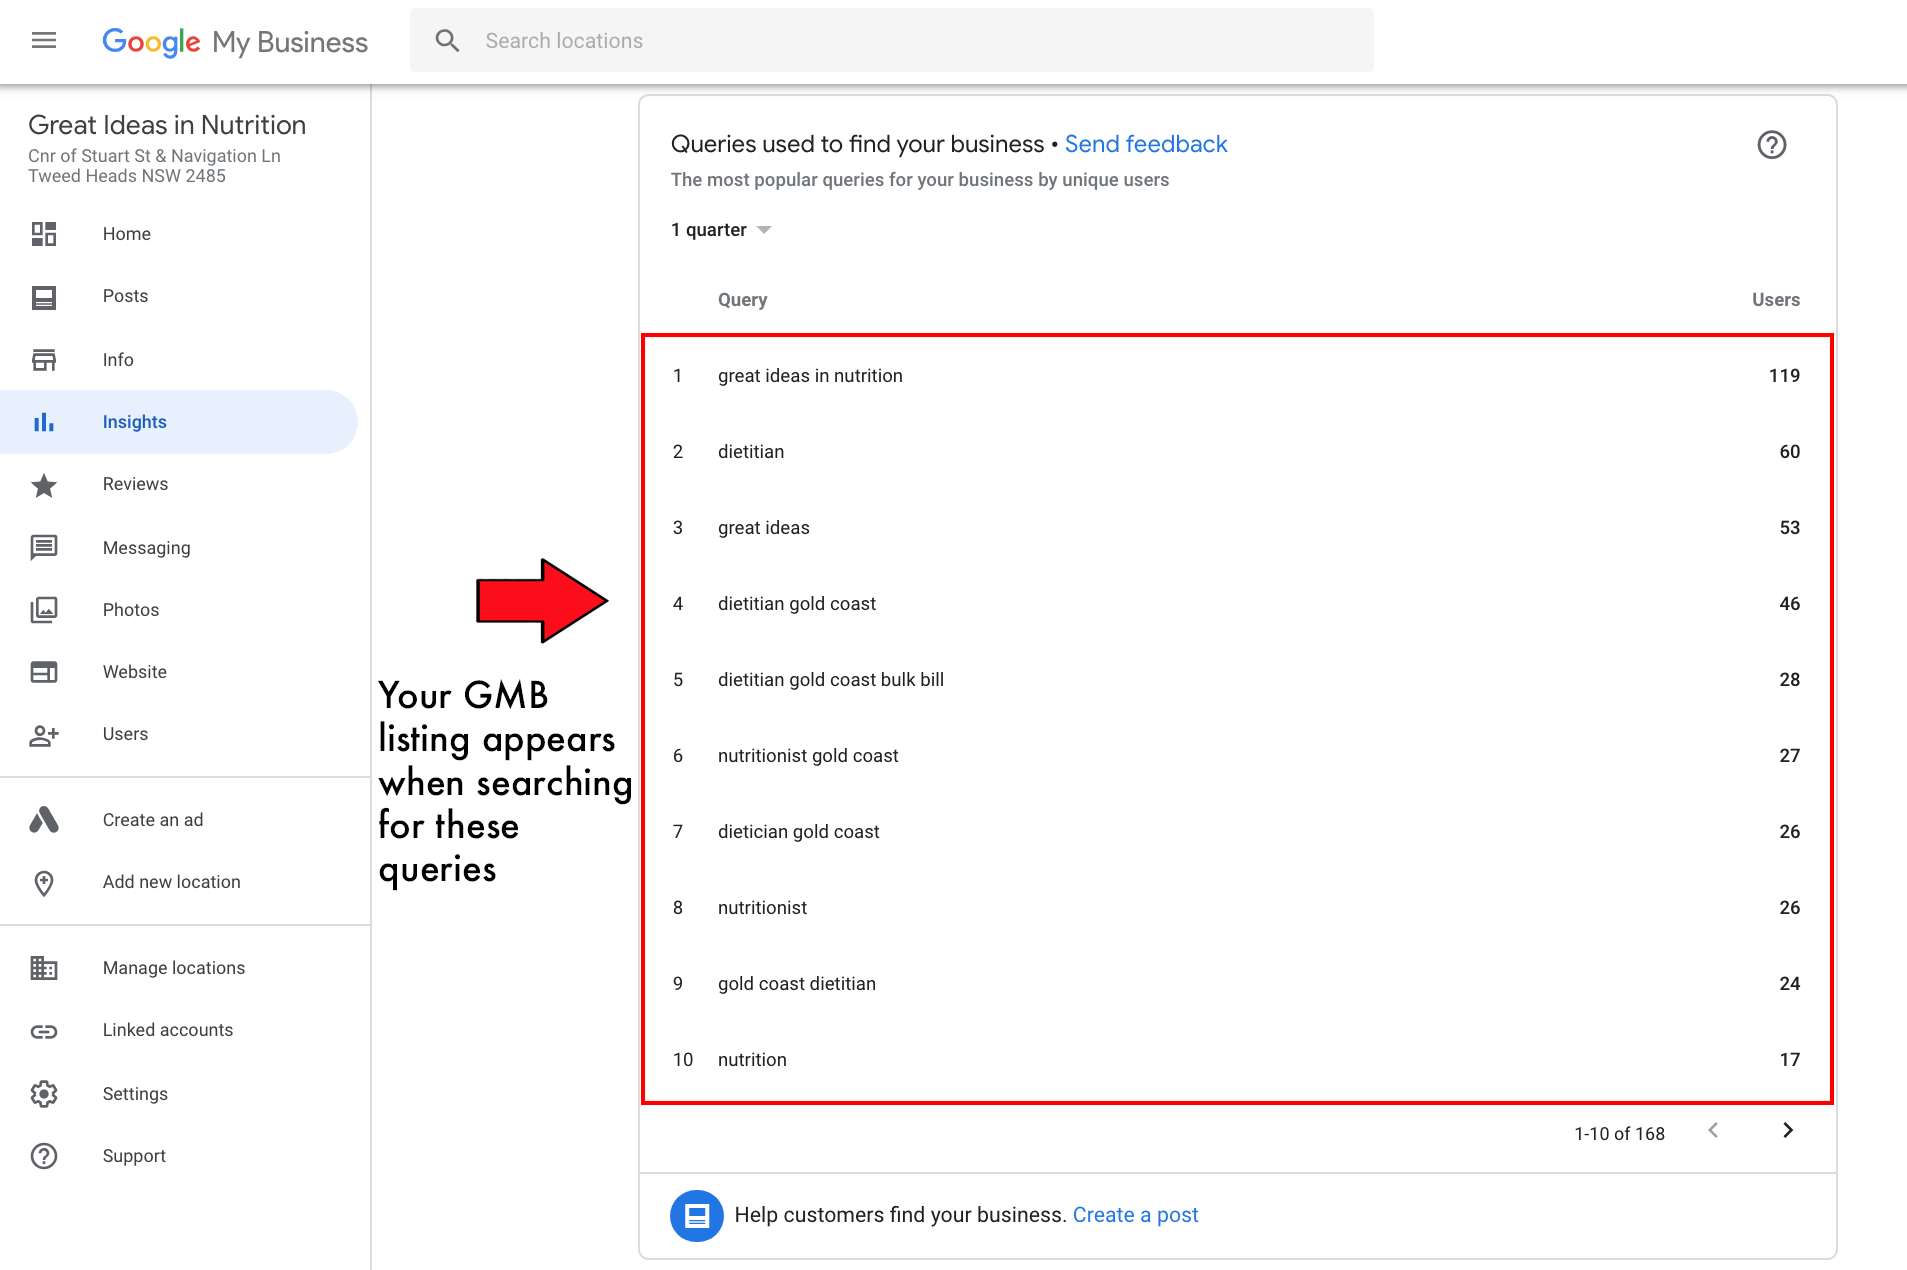 10 New Local Search Features You Should Be Using